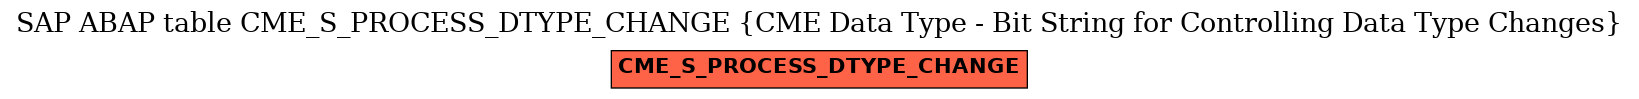 E-R Diagram for table CME_S_PROCESS_DTYPE_CHANGE (CME Data Type - Bit String for Controlling Data Type Changes)